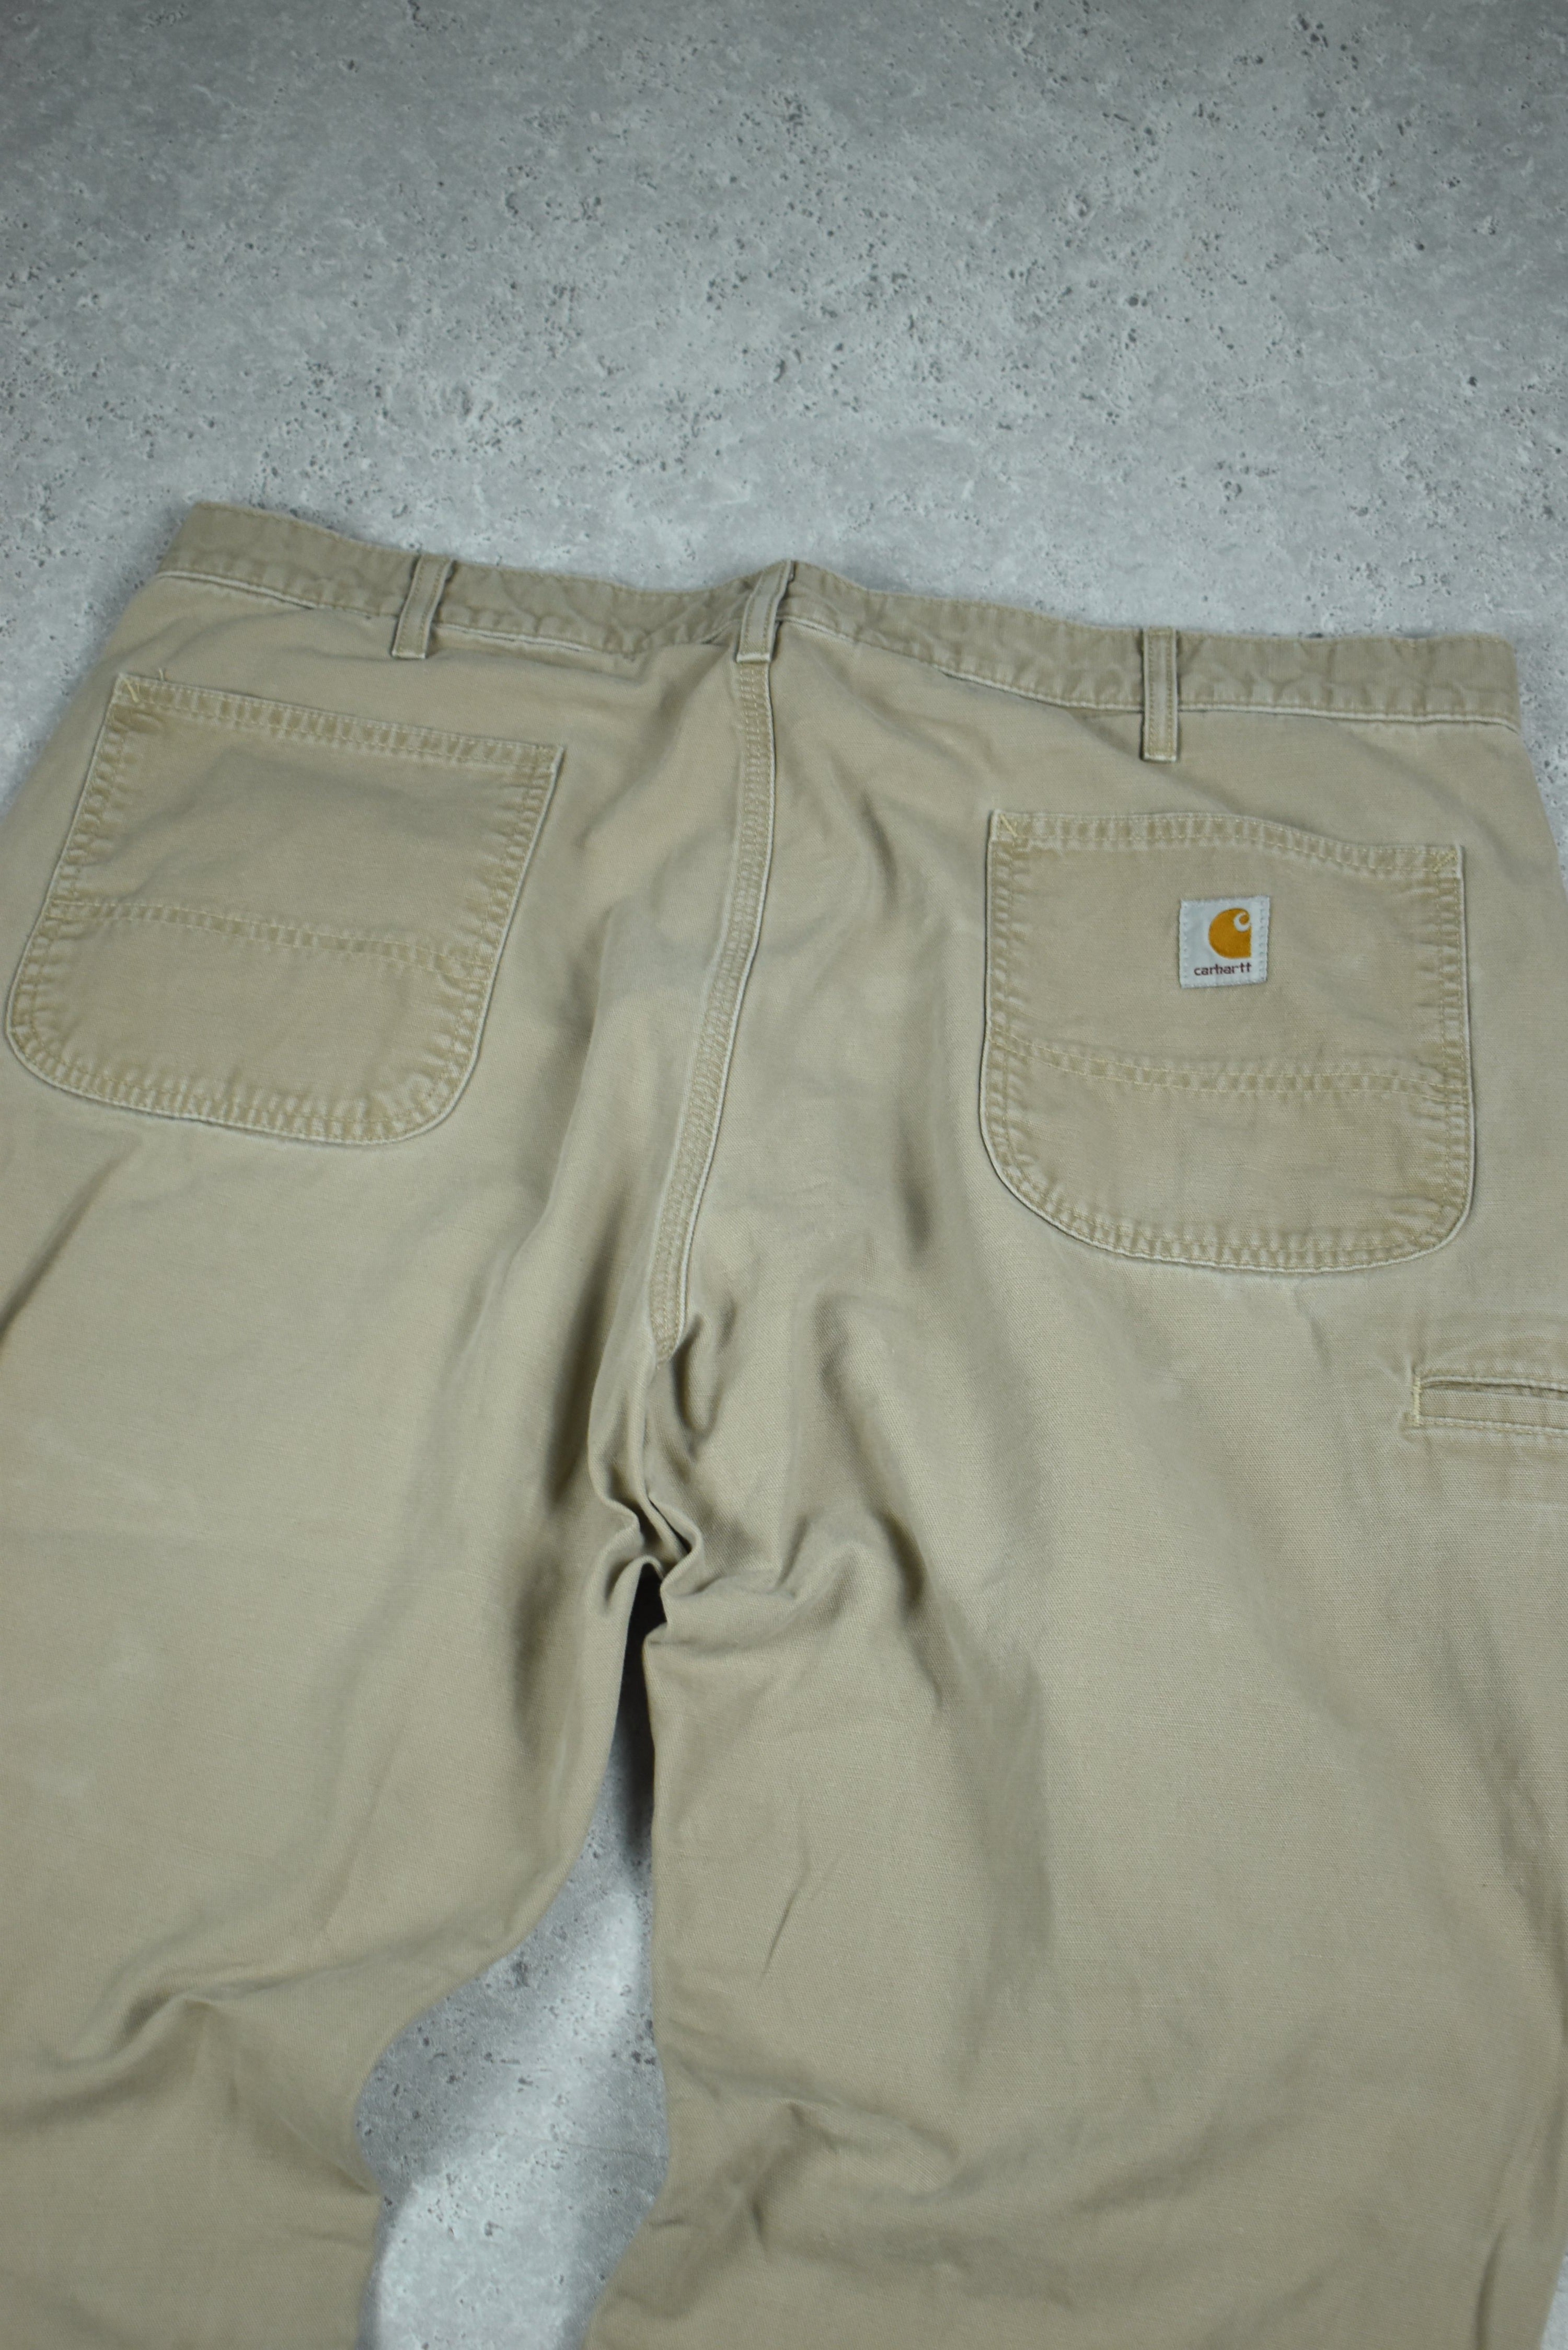 Vintage Carhartt Relaxed Fit Beige Pants 40x30